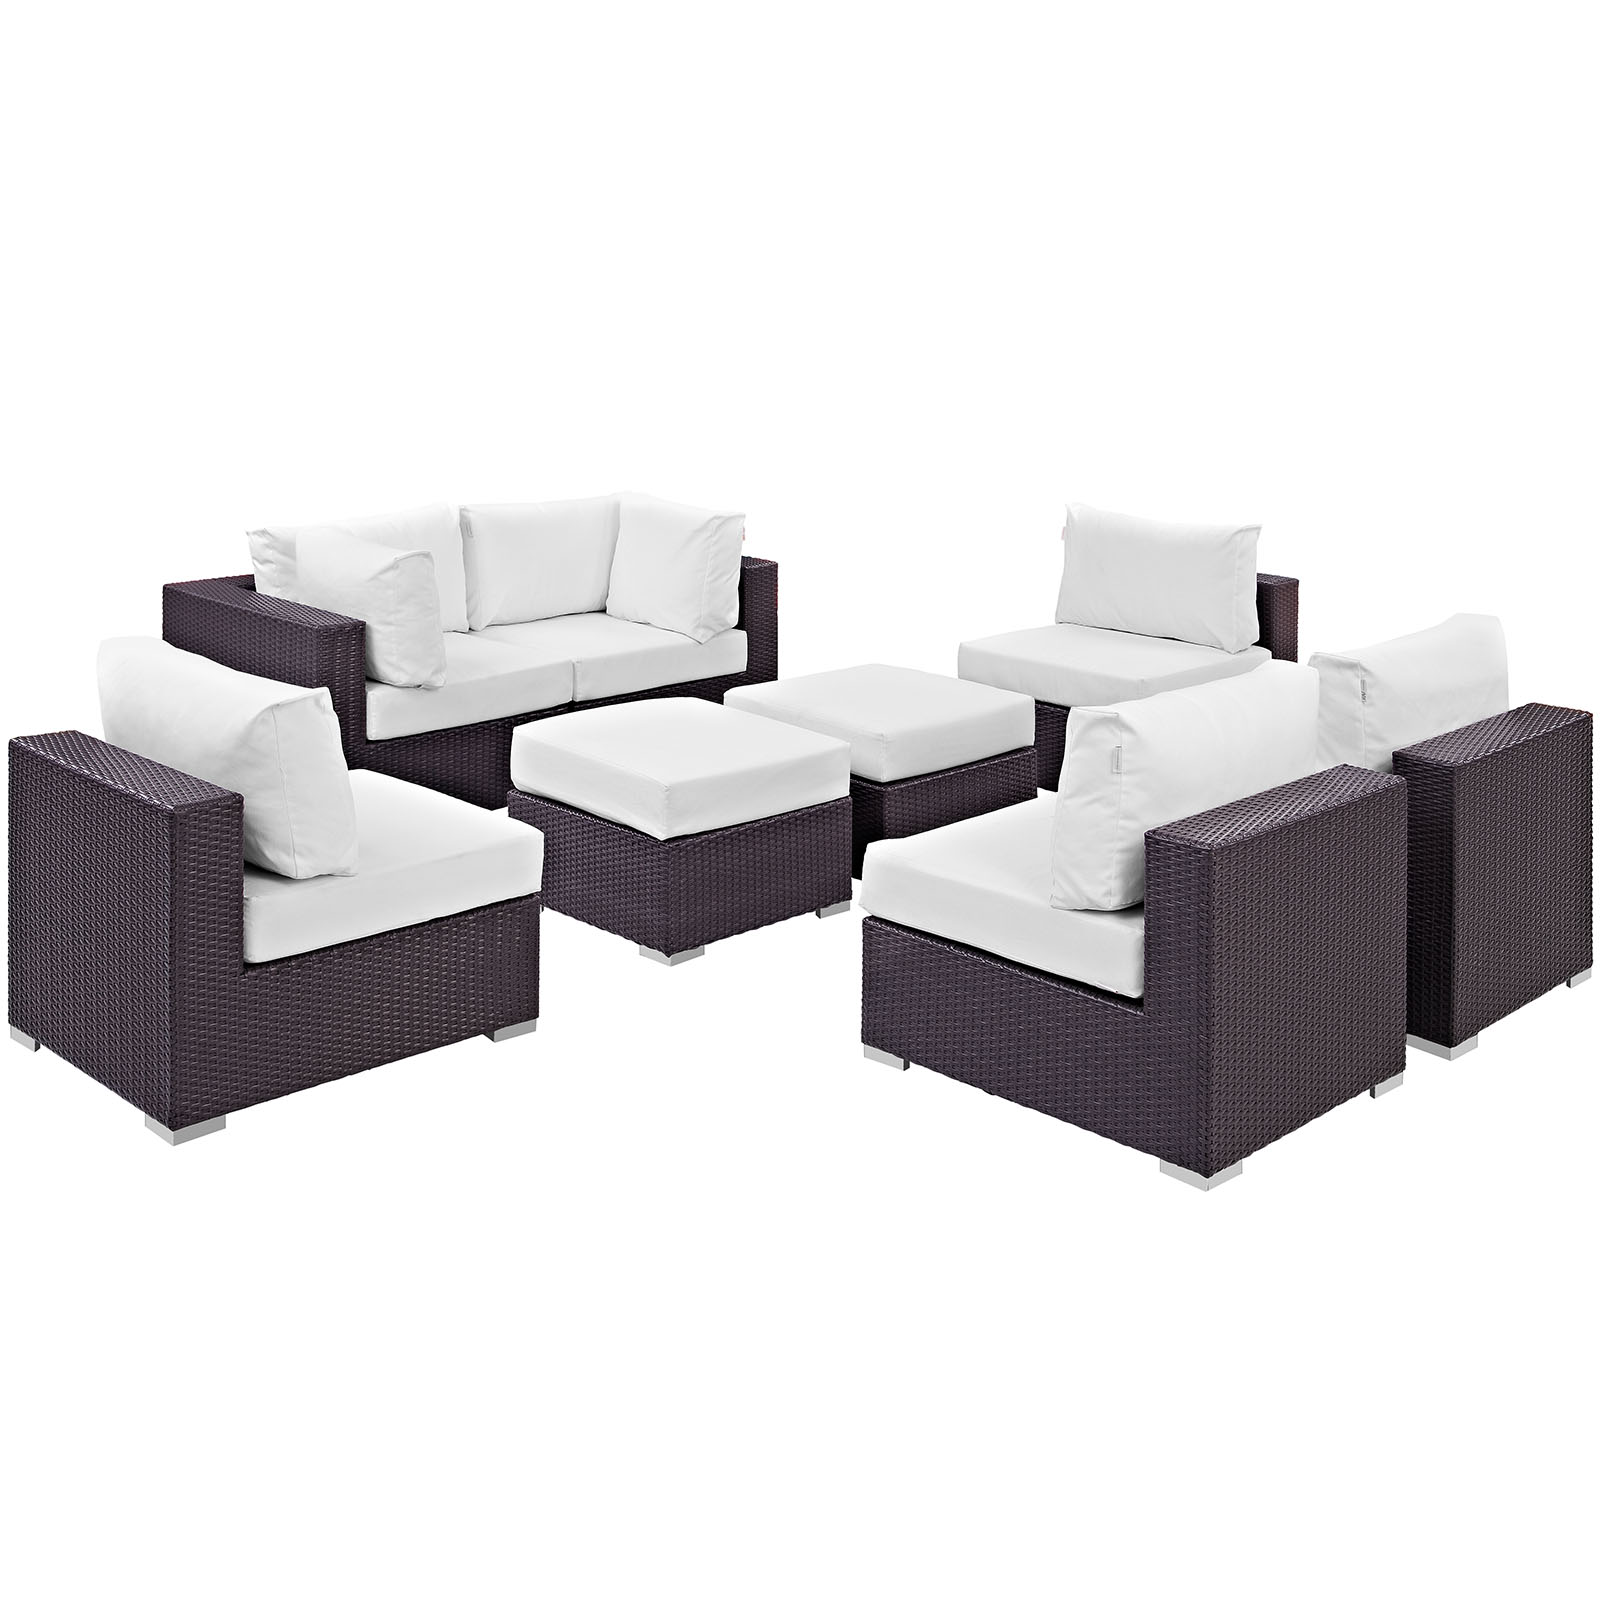 Modway Convene 8 Piece Outdoor Patio Sectional Set in Espresso White - image 3 of 7